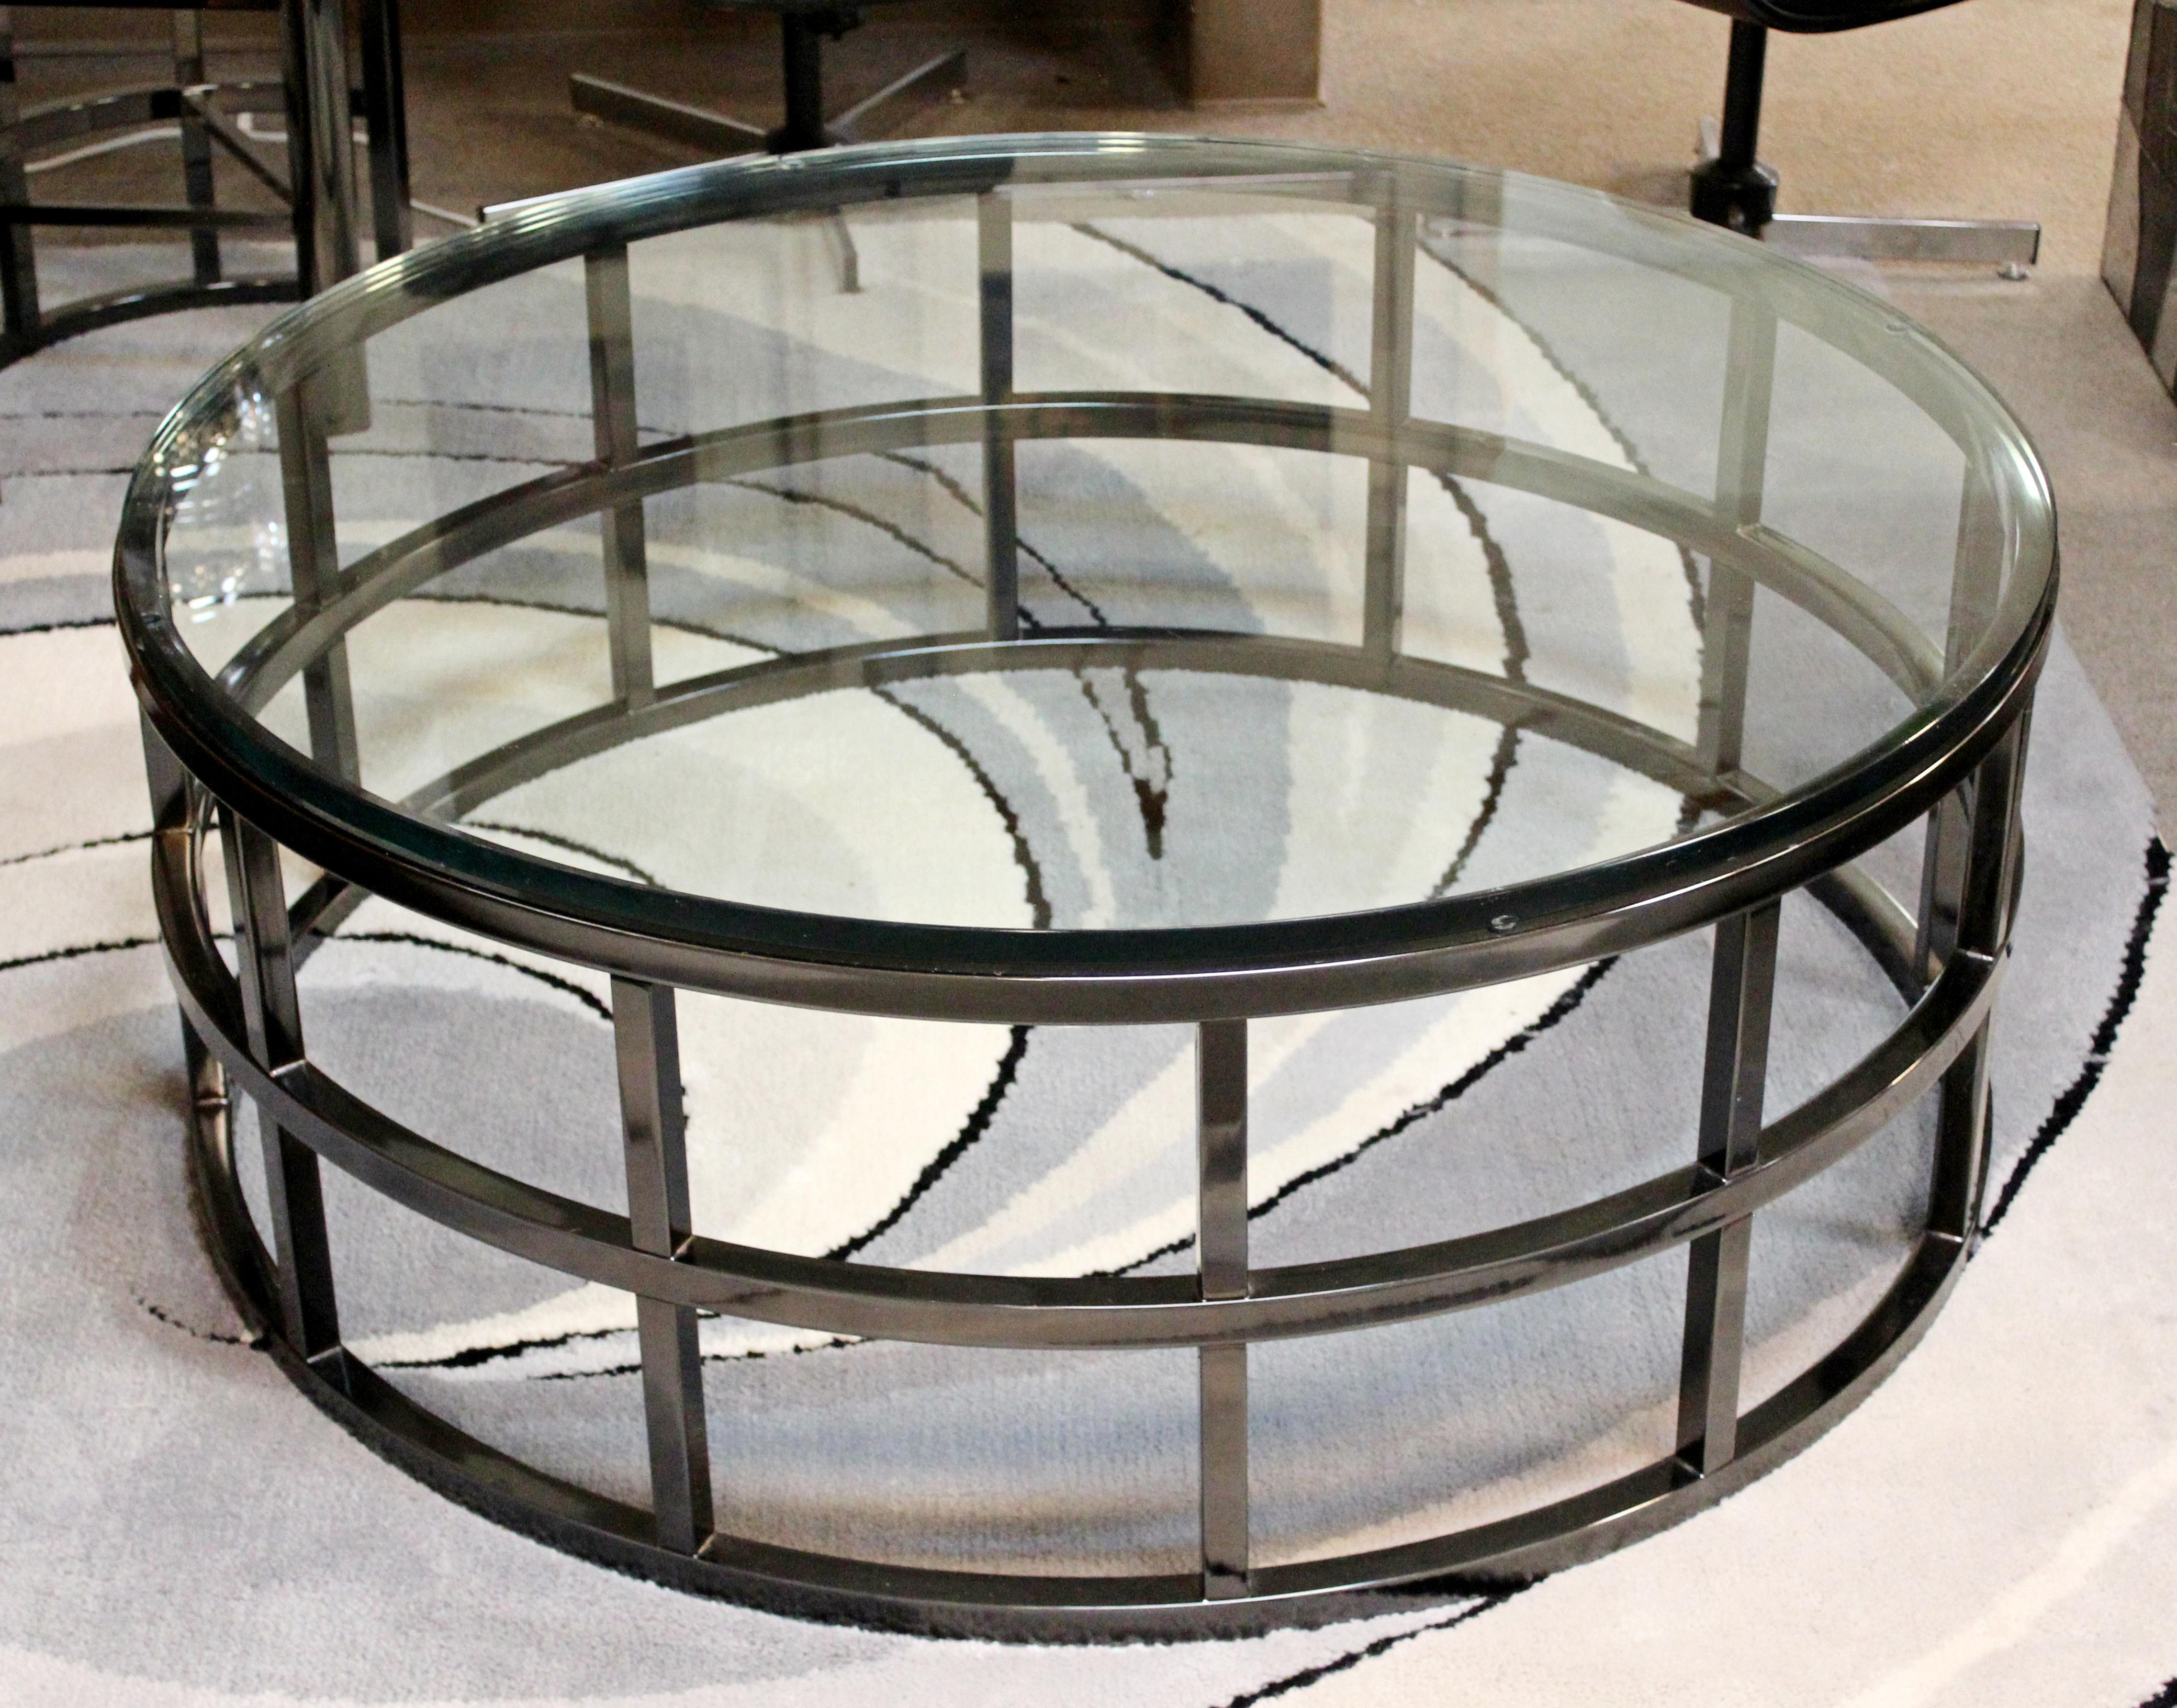 For your consideration is a marvellous, round coffee table with a glass top on a gunmetal base by Brueton, circa 1980s. Amazing piece of round green edge glass that is 3/4